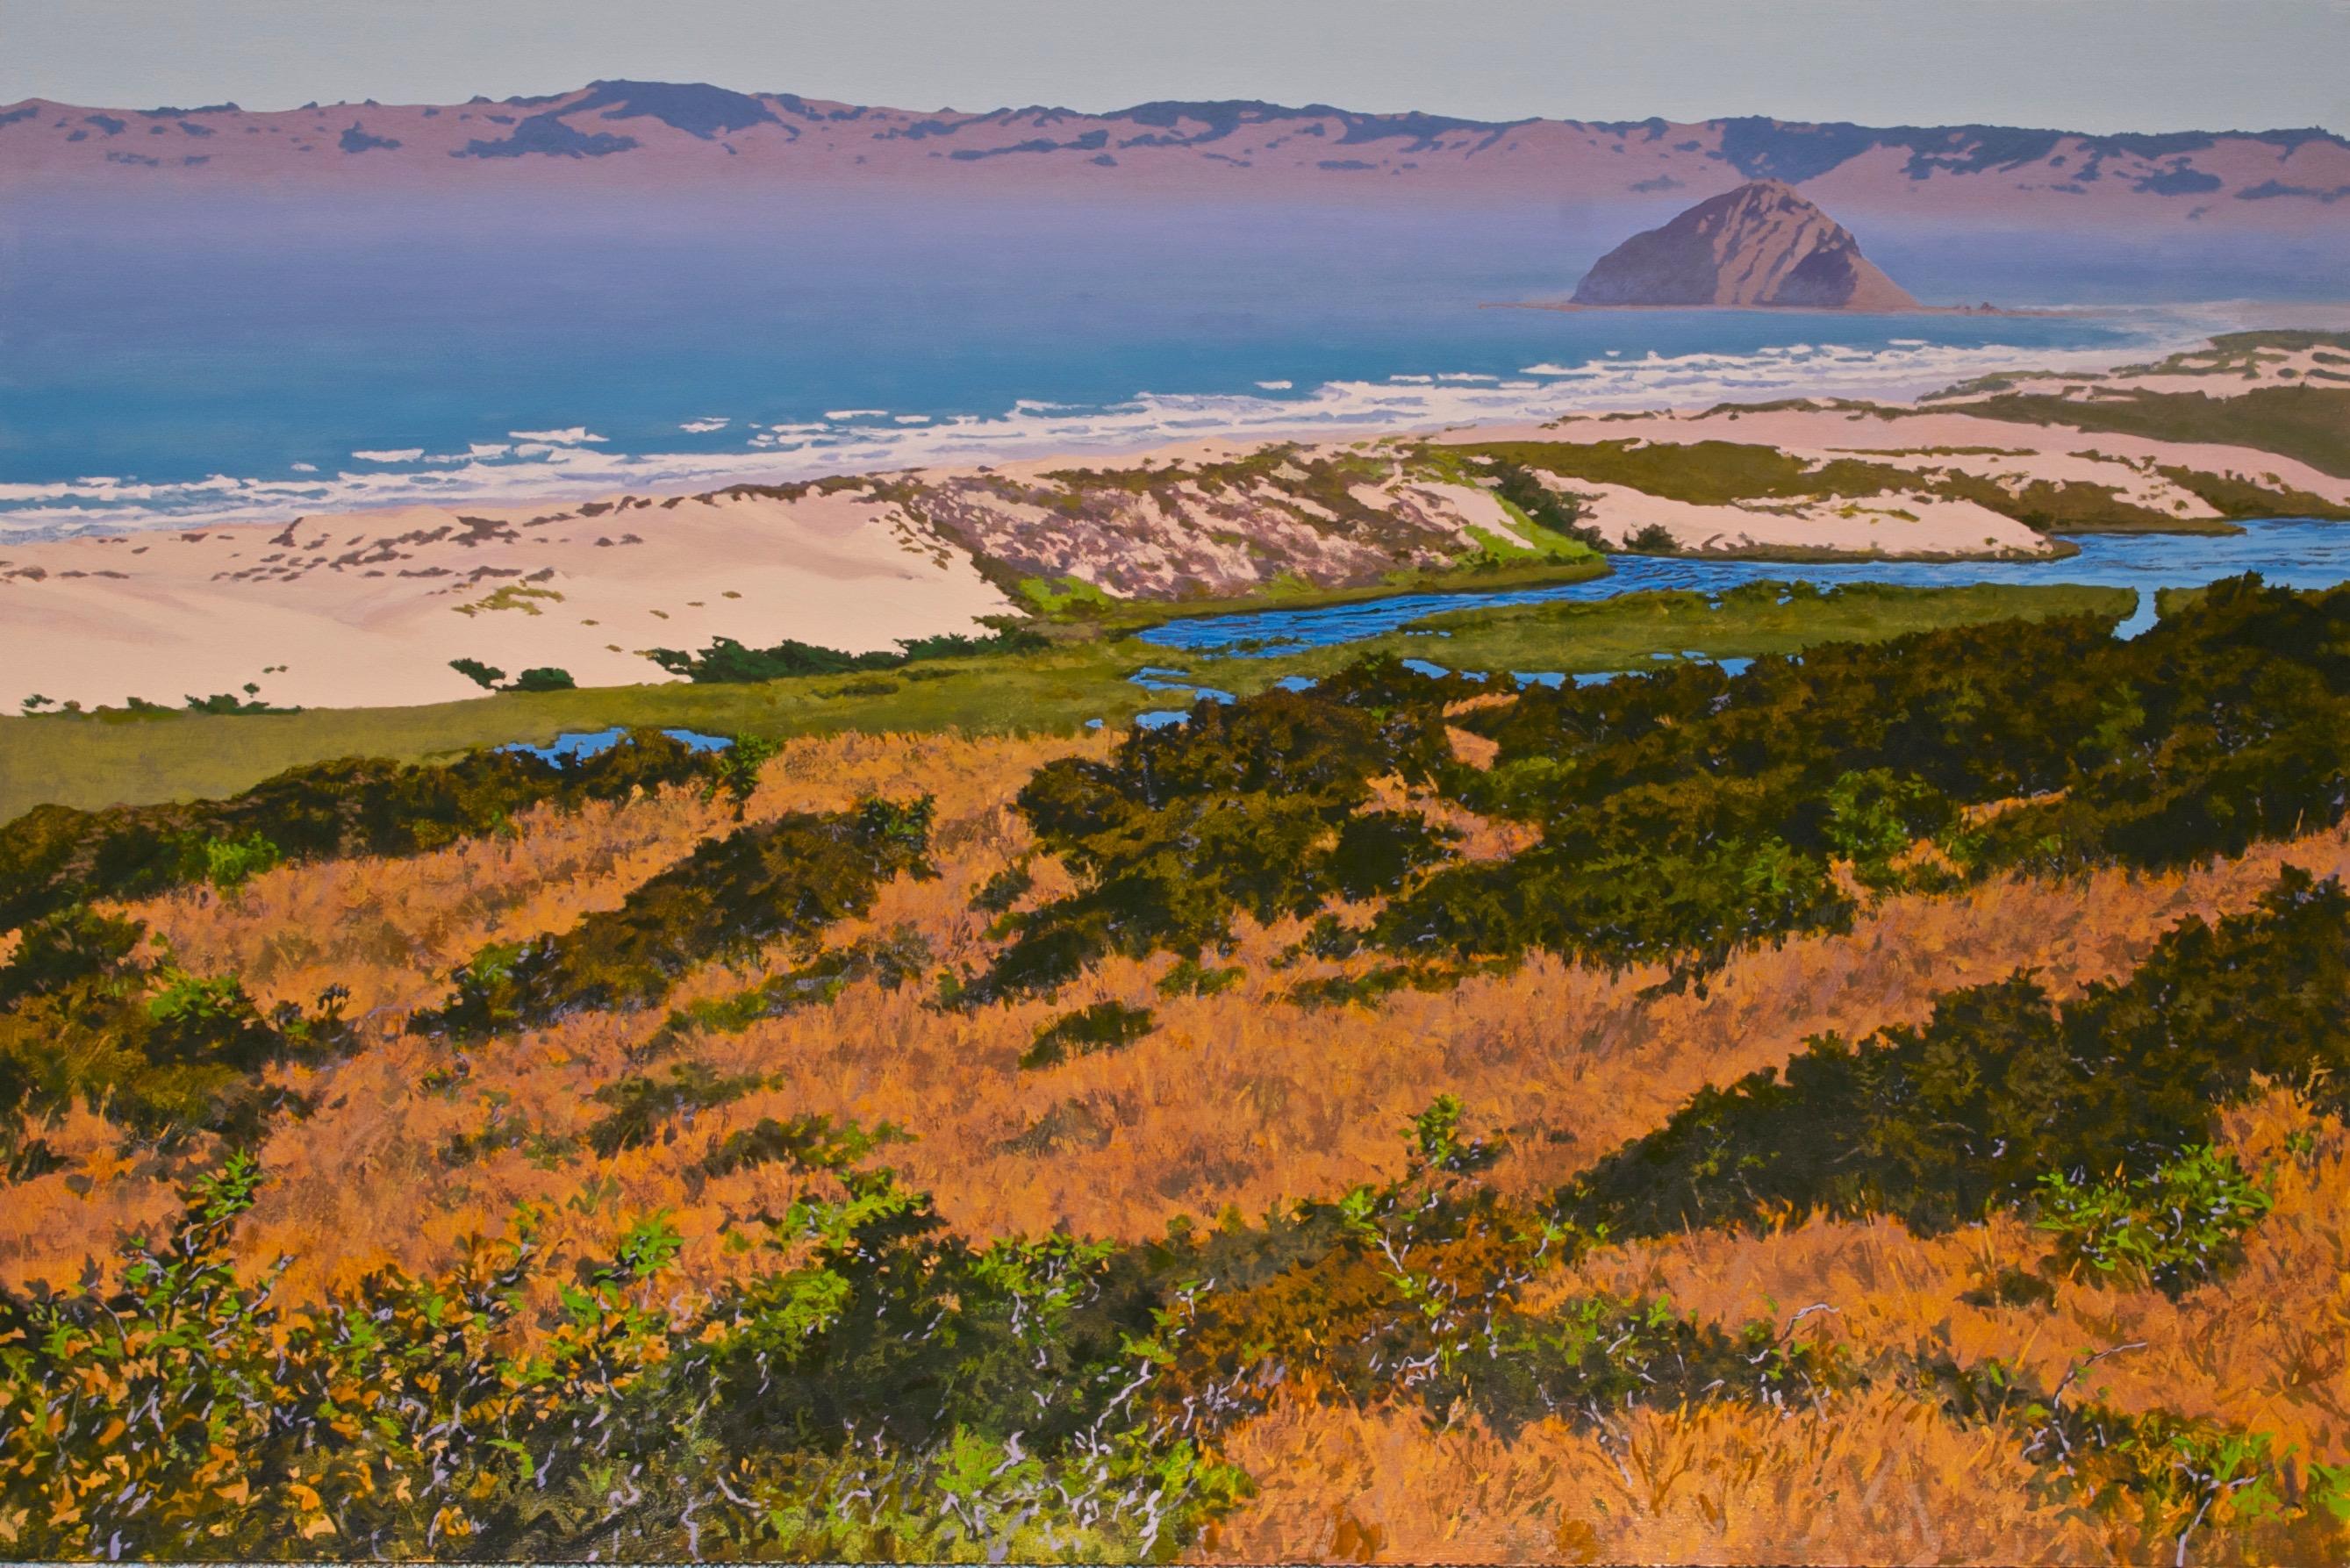 Peter Loftus Landscape Painting - Dunes at Morro Bay /  44 x 66 in. oil on canvas nature painting